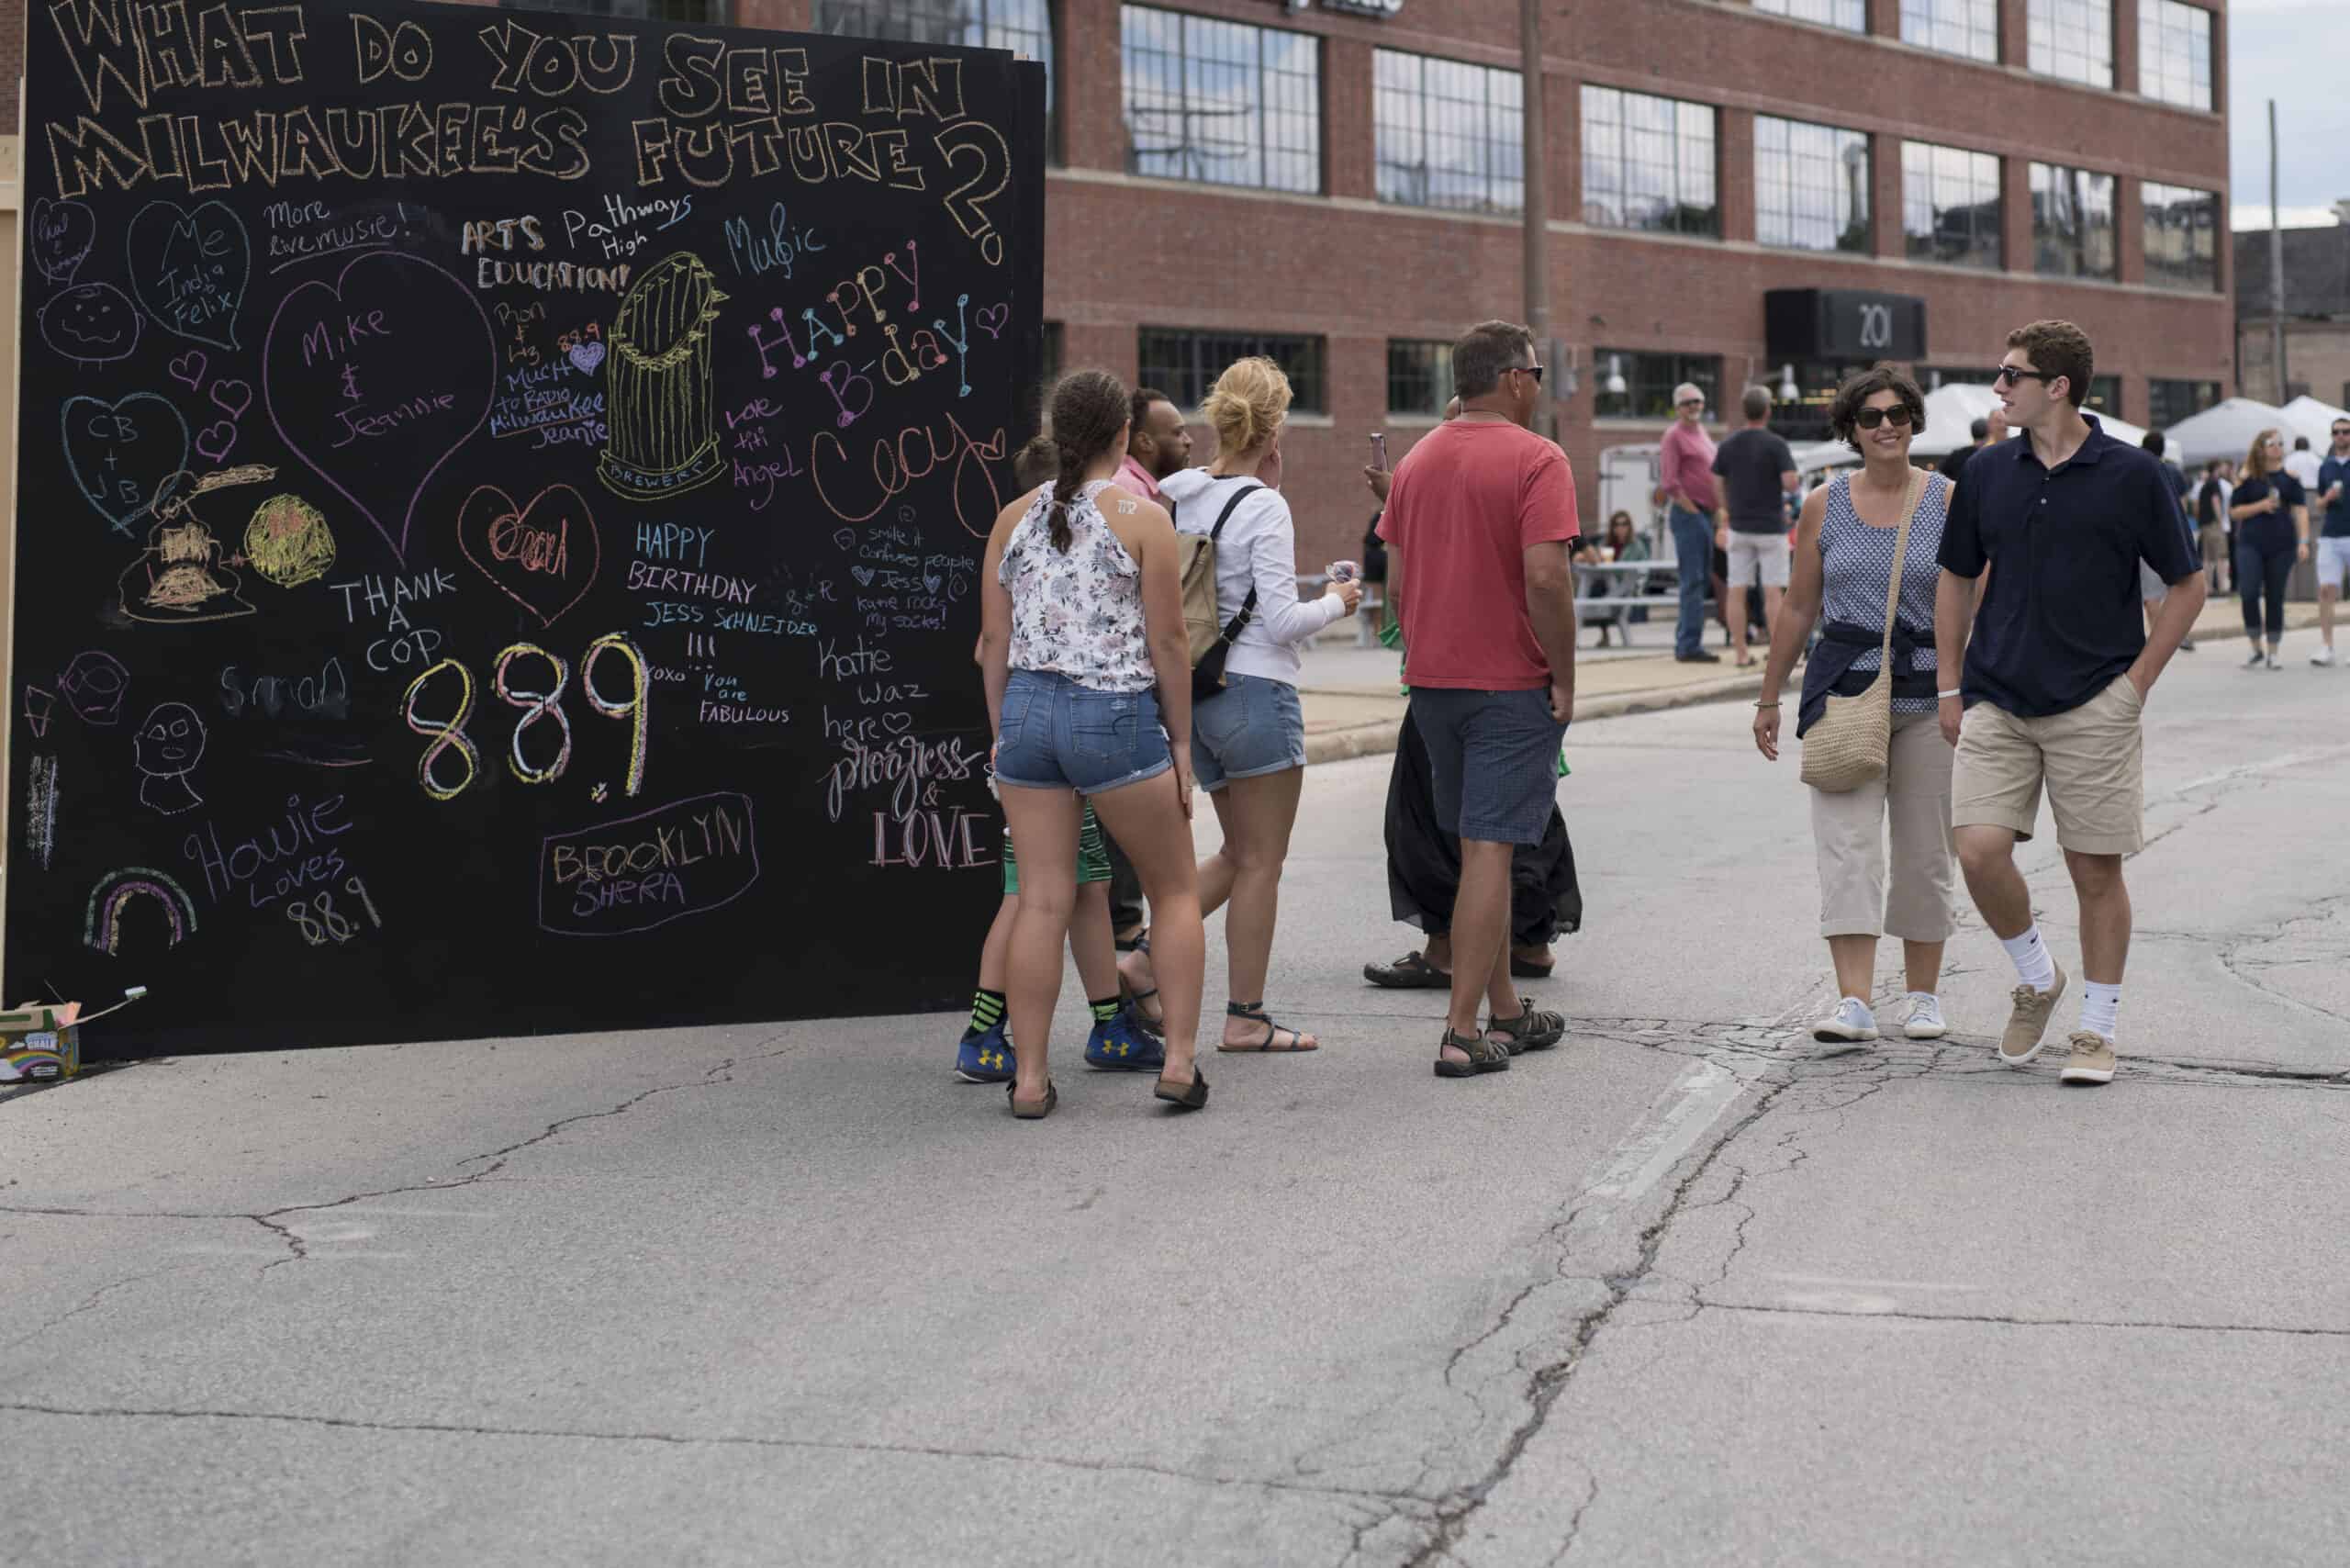 Photo of giant chalkboard asking "What do you see in Milwaukee's Future" at the 88Nine Radio Milwaukee block party